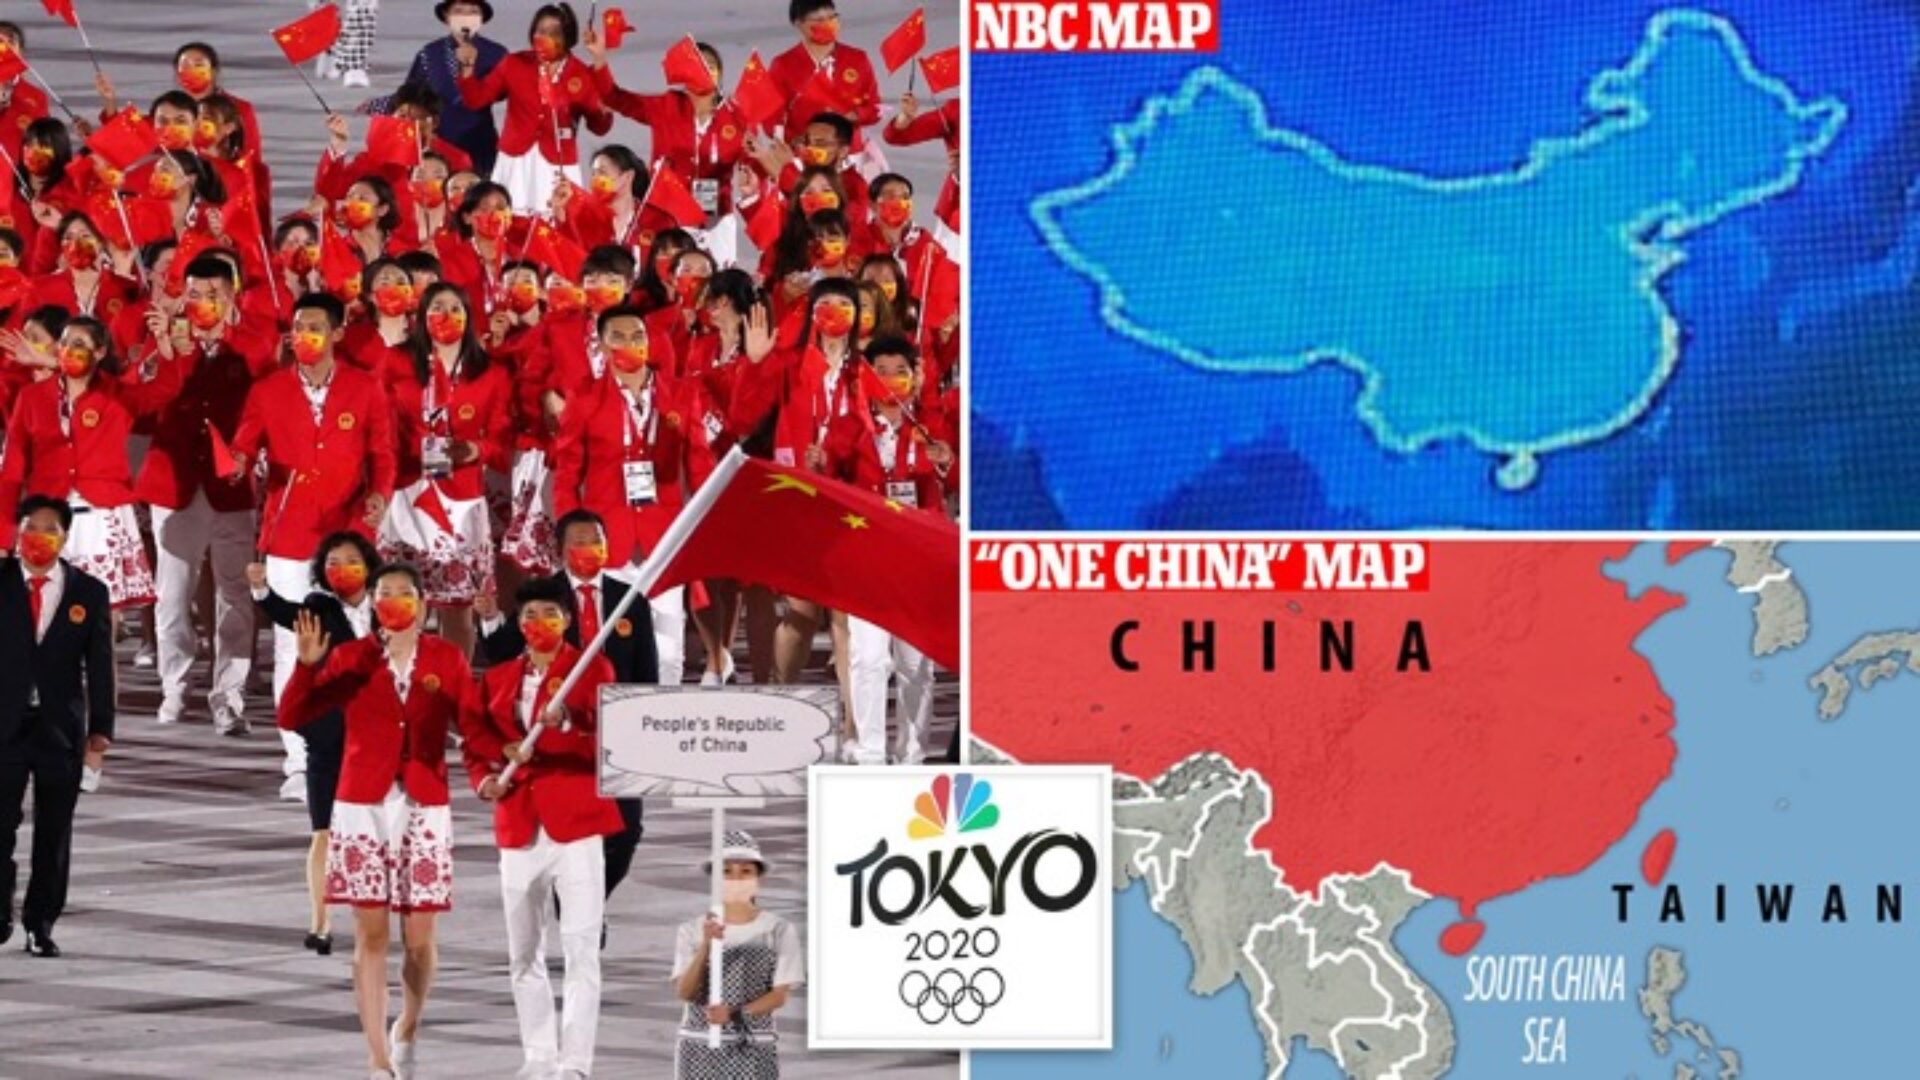 China lashed out at Comcast Corp.’s NBCUniversal for displaying an “incomplete” map of the country